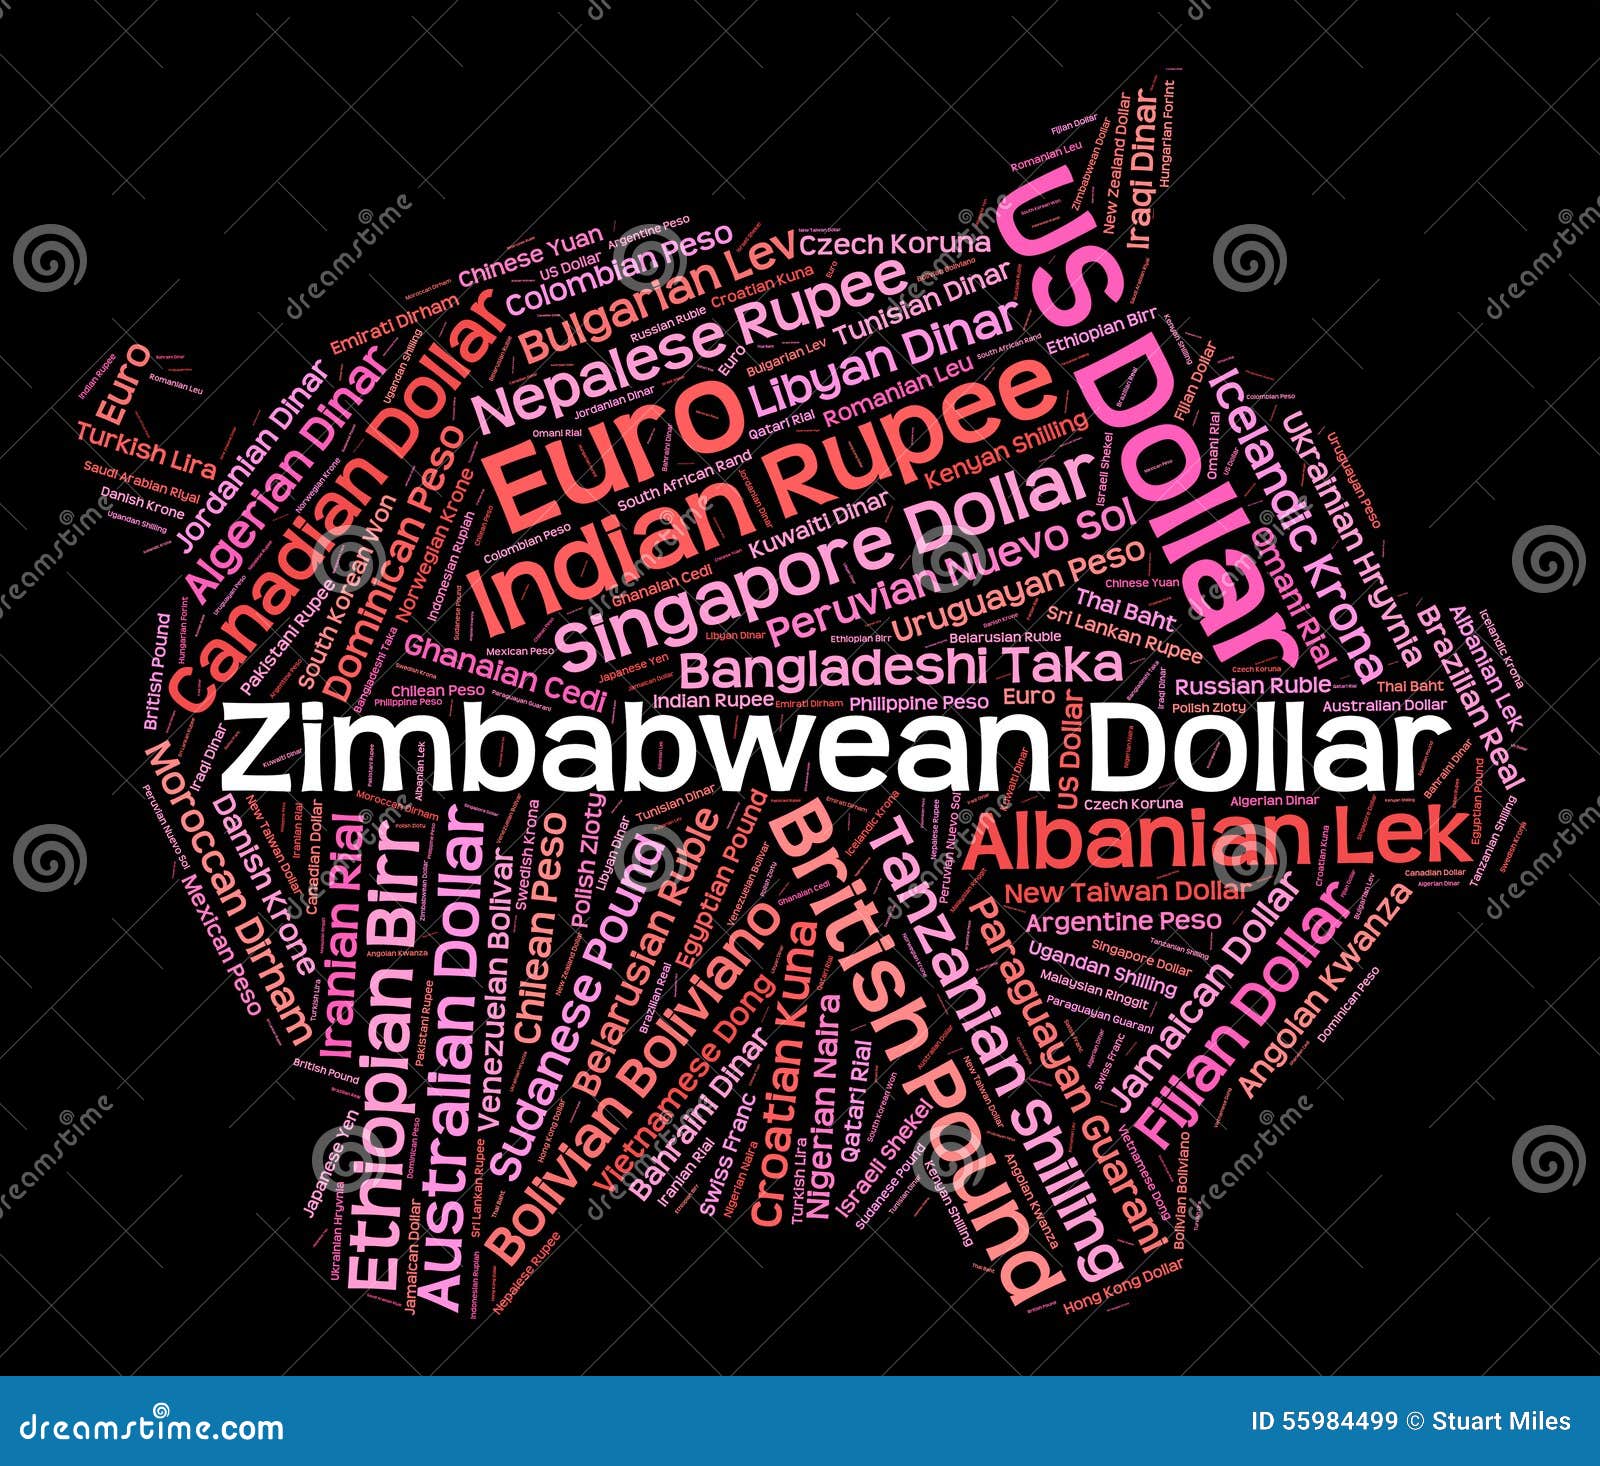 how to start forex trading in zimbabwe